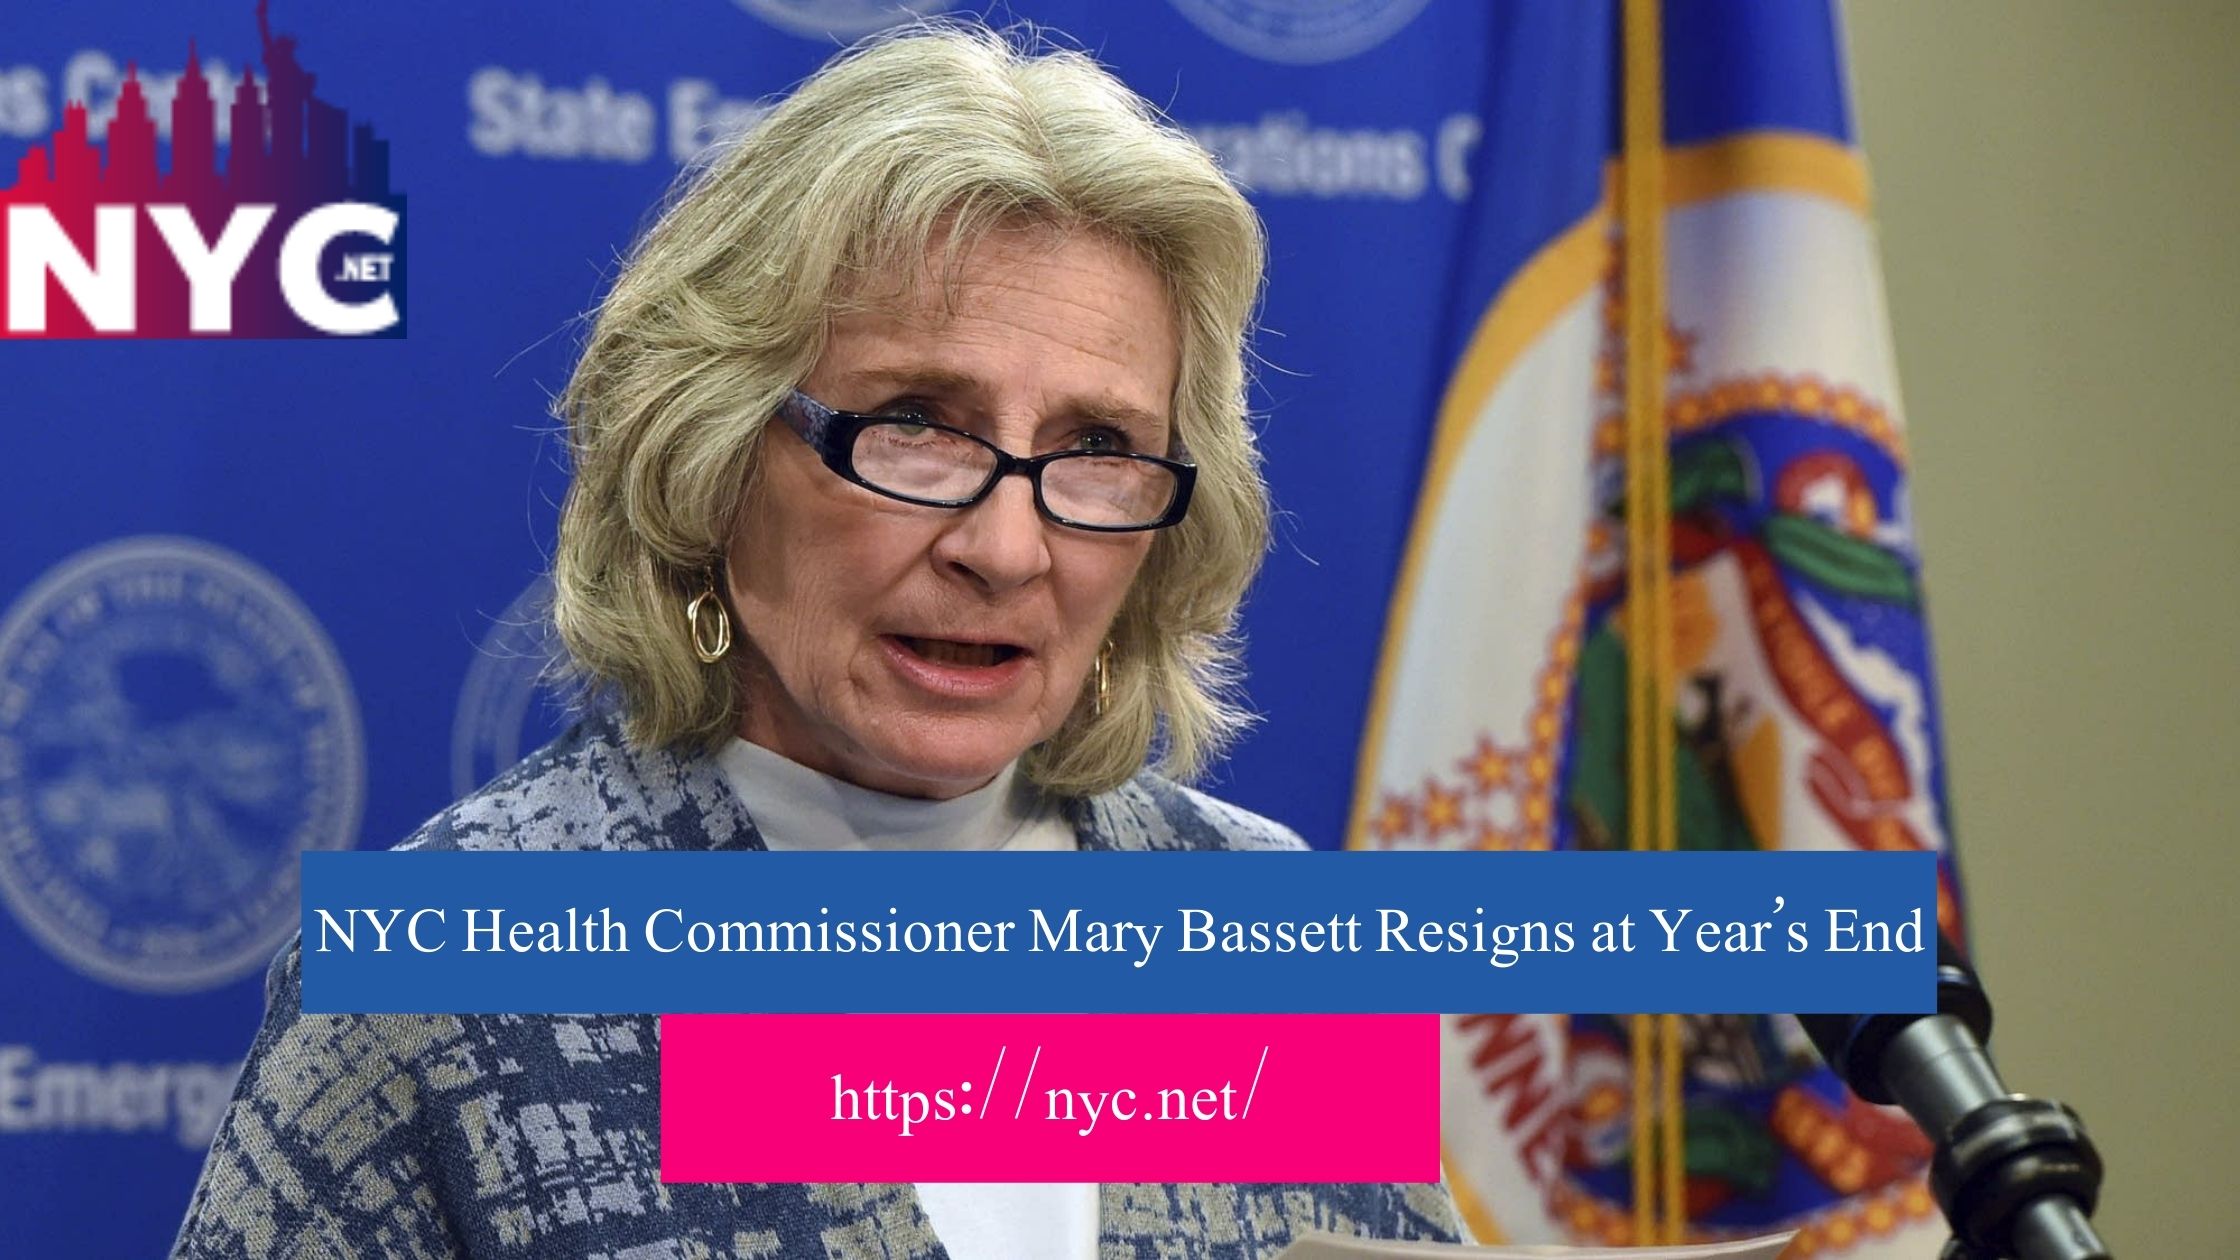 NYC Health Commissioner Mary Bassett Resigns at Year’s End